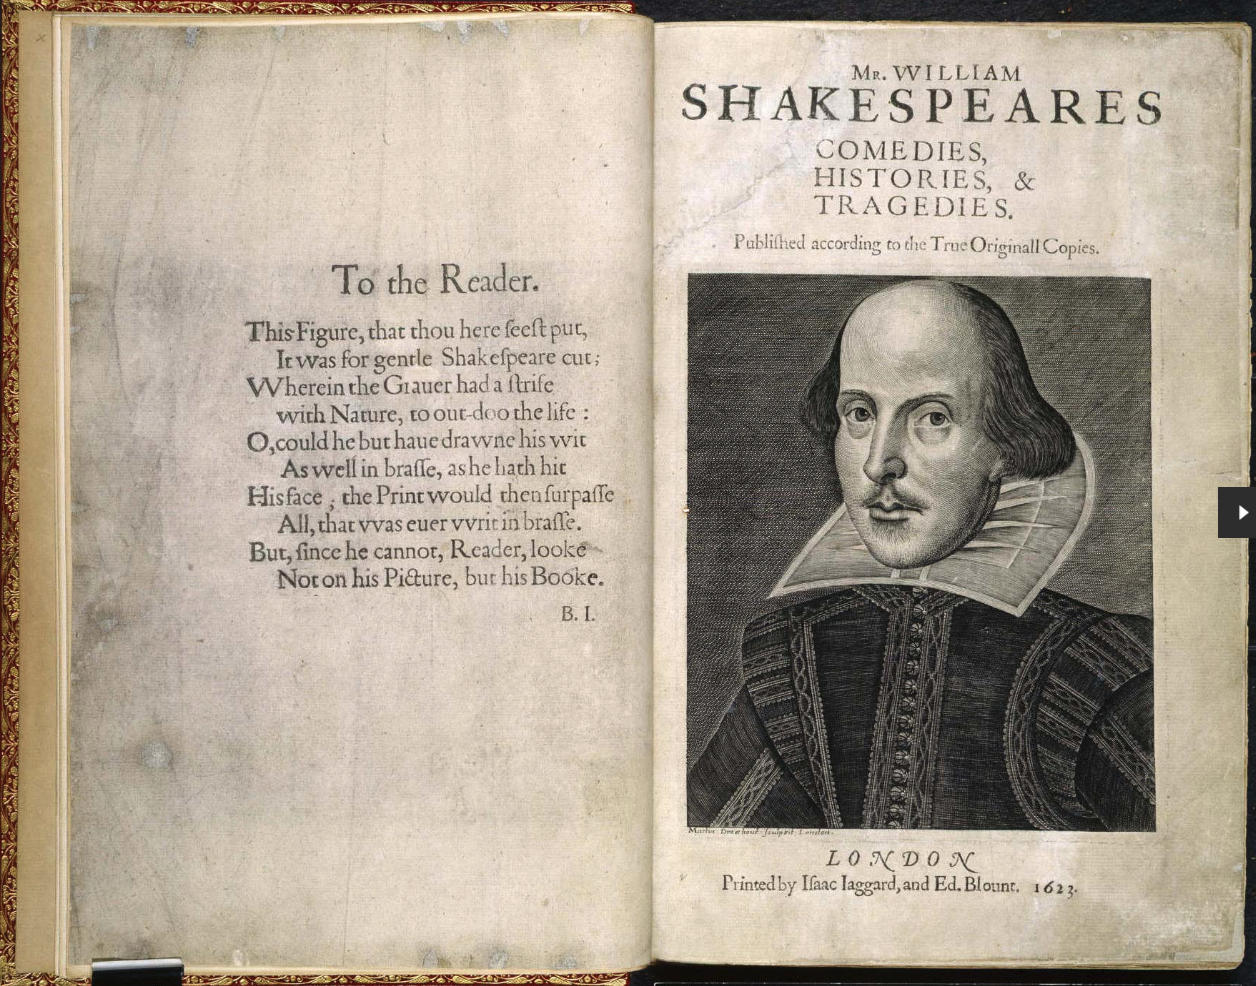 Title page and frontispiece of the first folio.